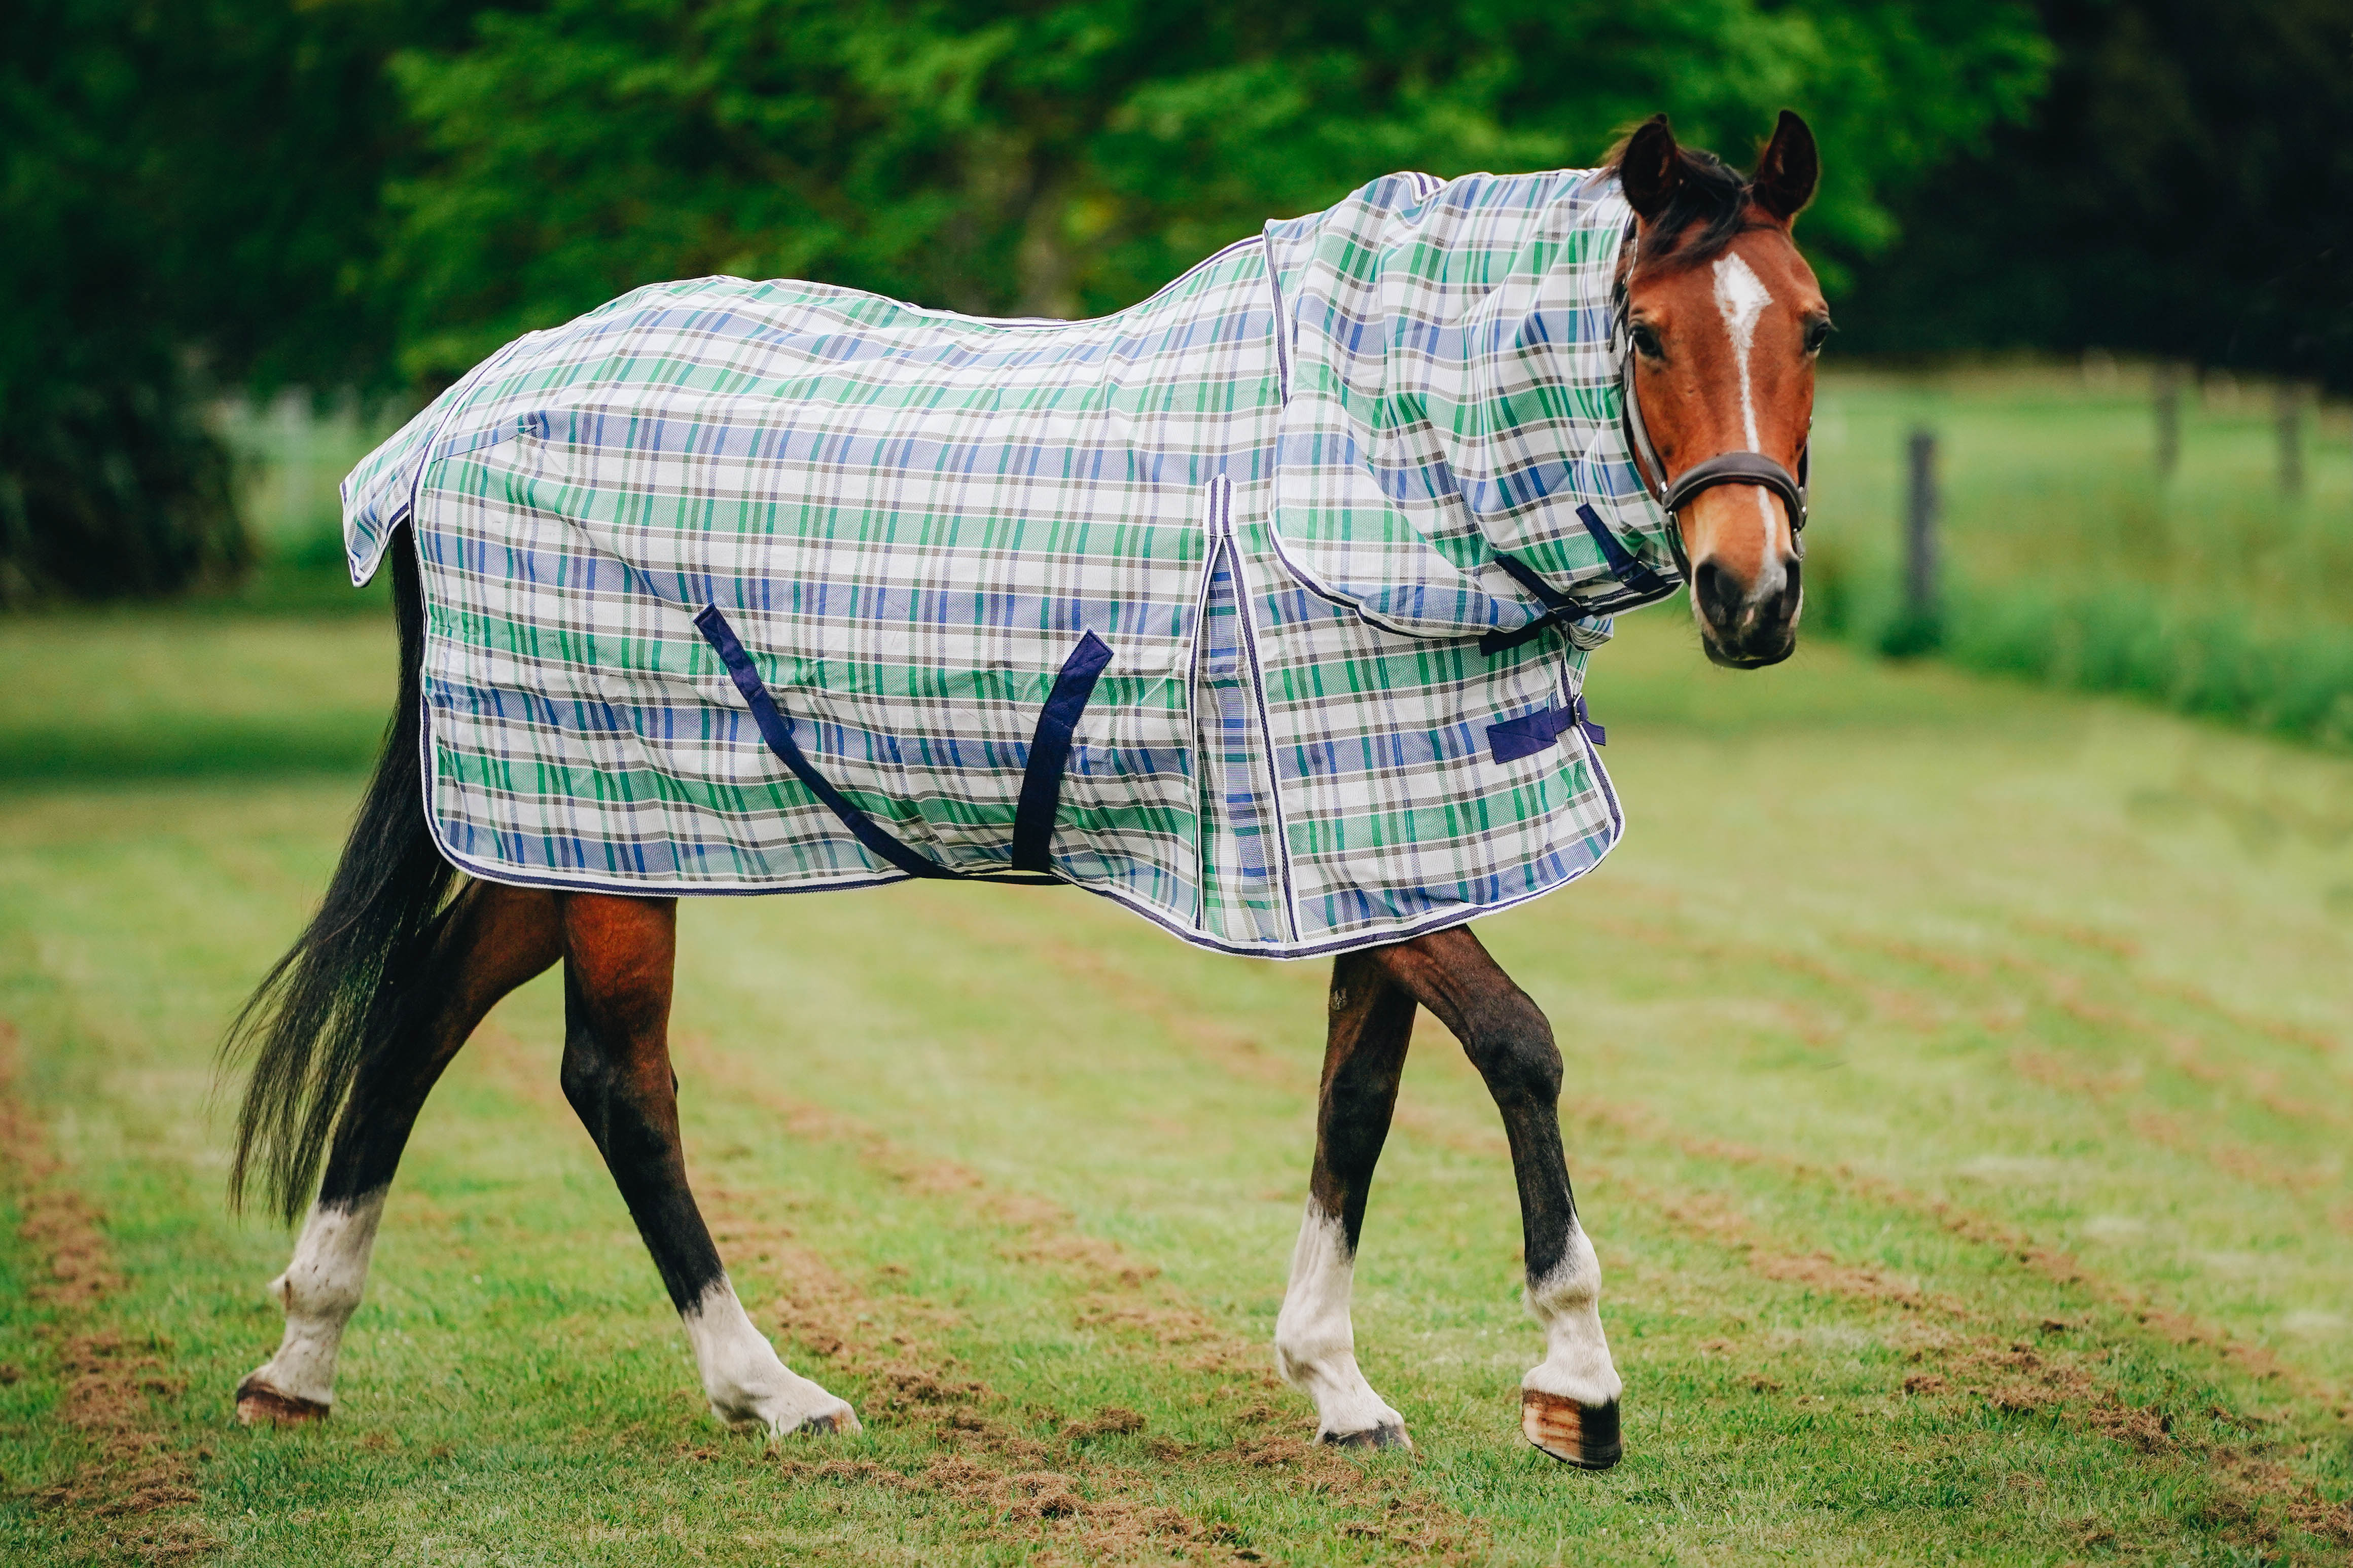 Mesh PVC Detachable with FREE Fly Mask*